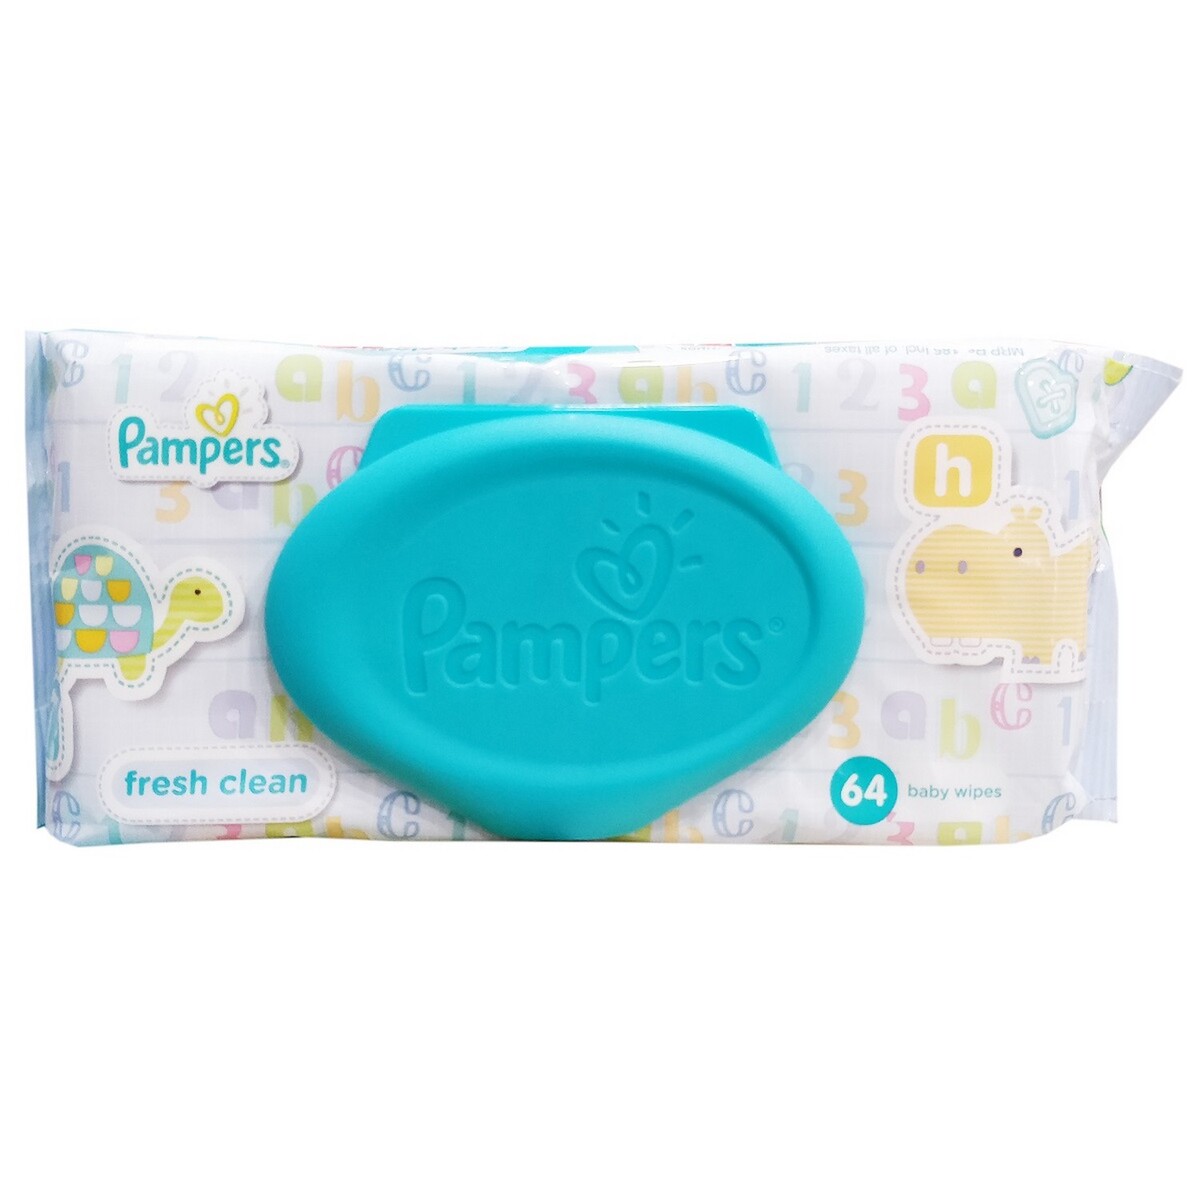 Pampers Baby Wipes Fresh Clean 64's